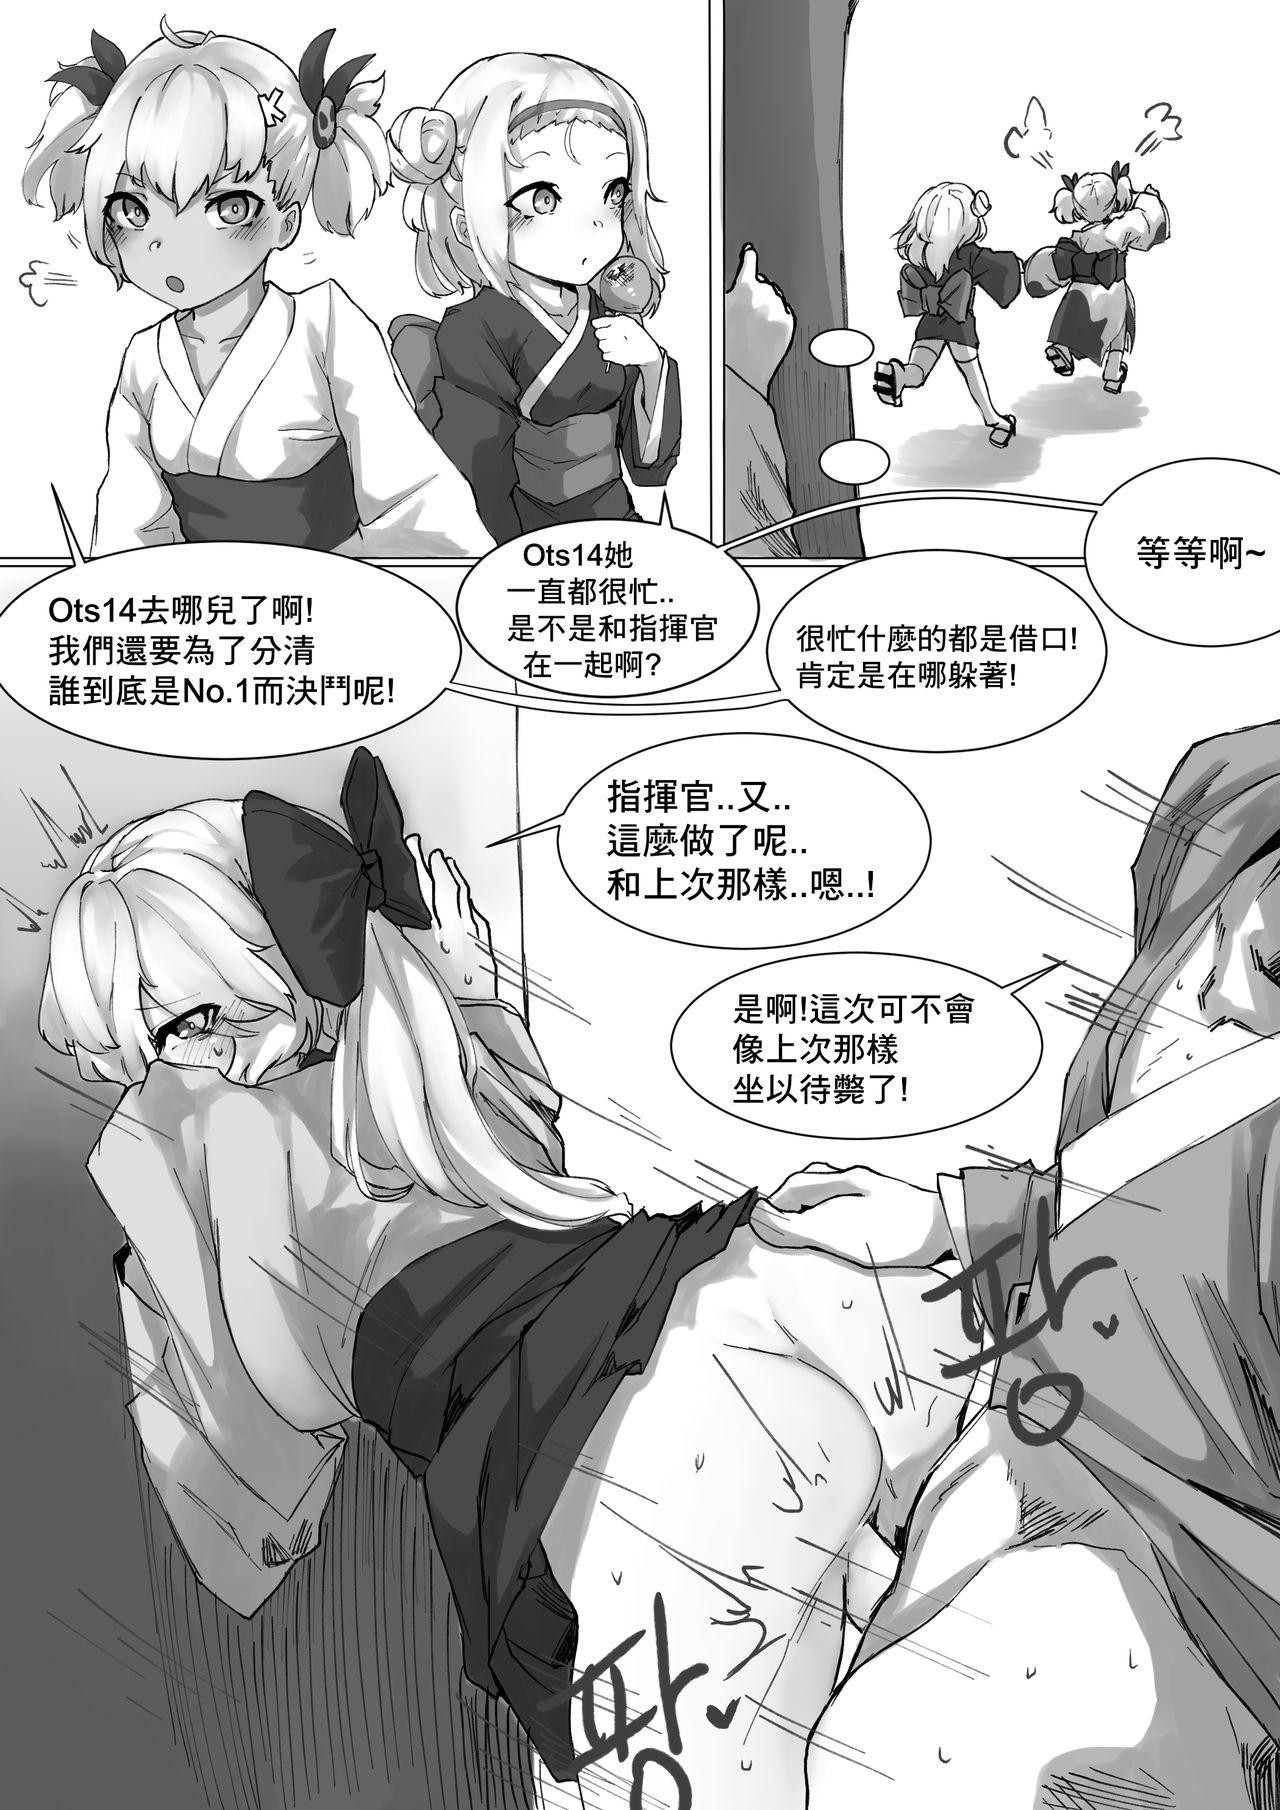 Orgy How To Use OTS-14 - Girls frontline Casting - Page 10